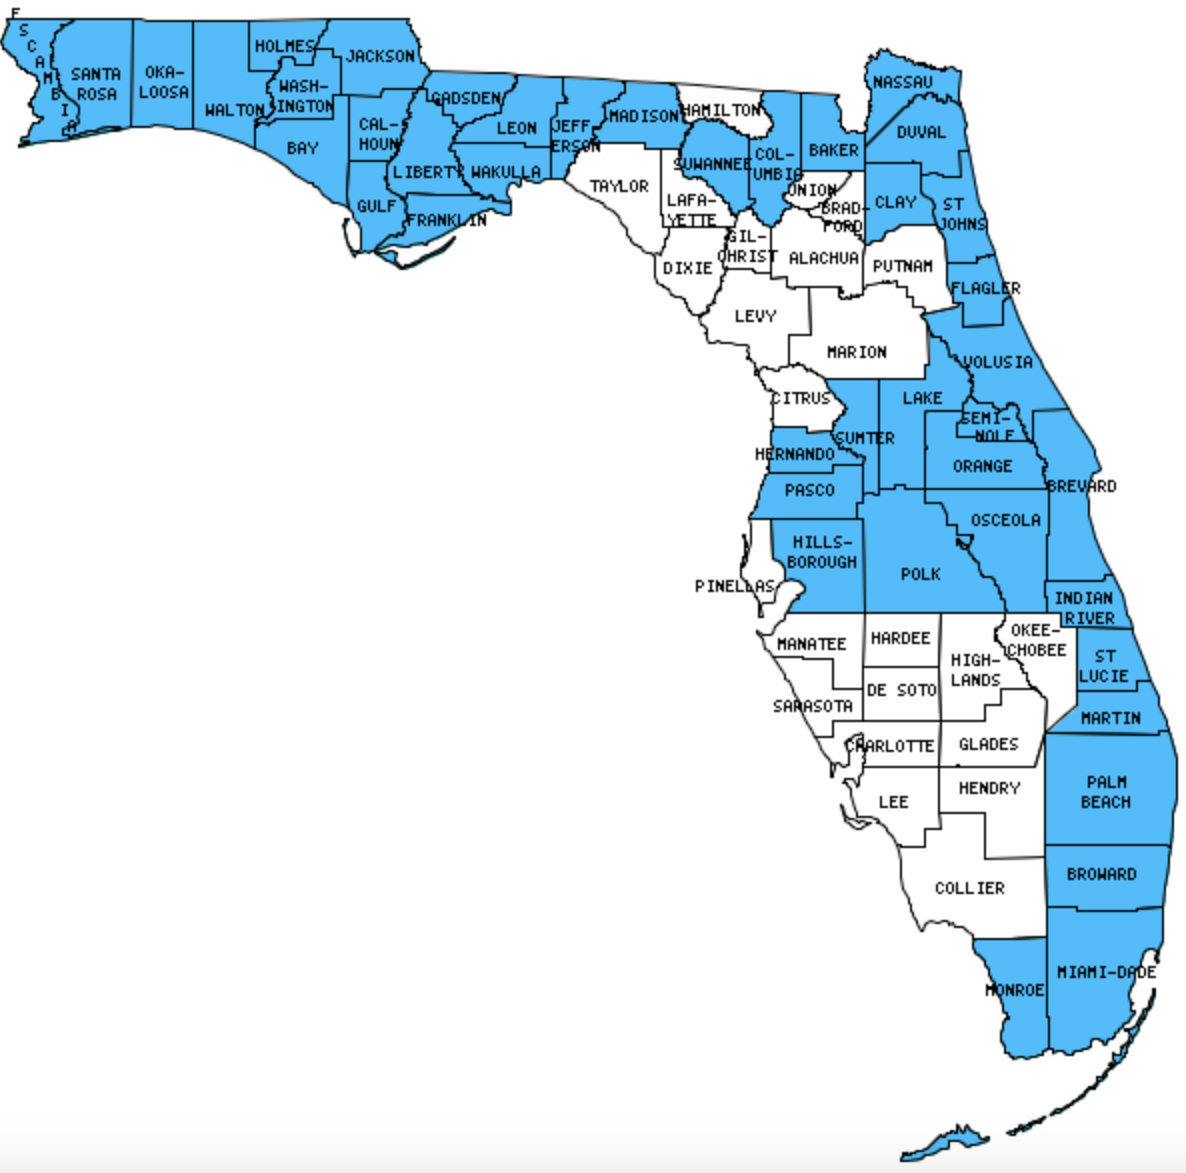 The study area (Hillsborough County) and the five surrounding counties